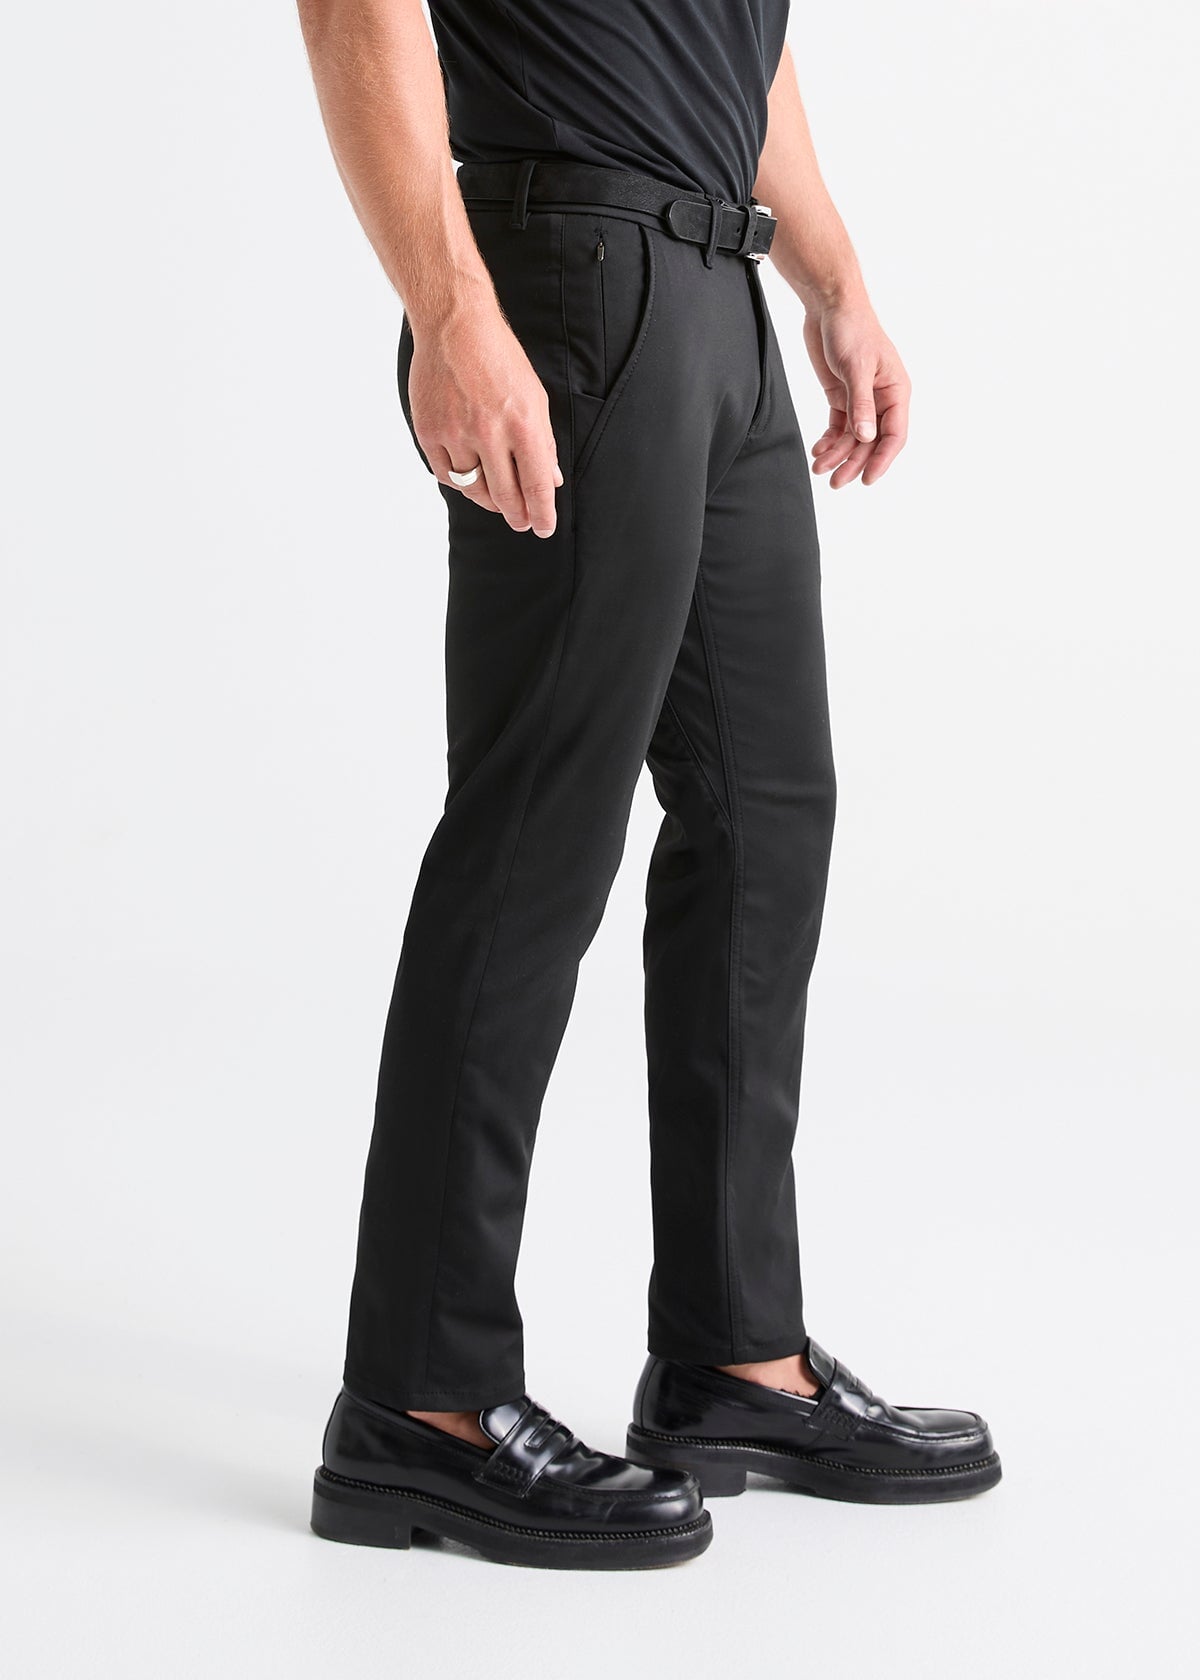 Womens Dress Pants Work Office Slacks Business Casual Stretch Tapered Loose  Fit High Waisted Trousers with Pockets